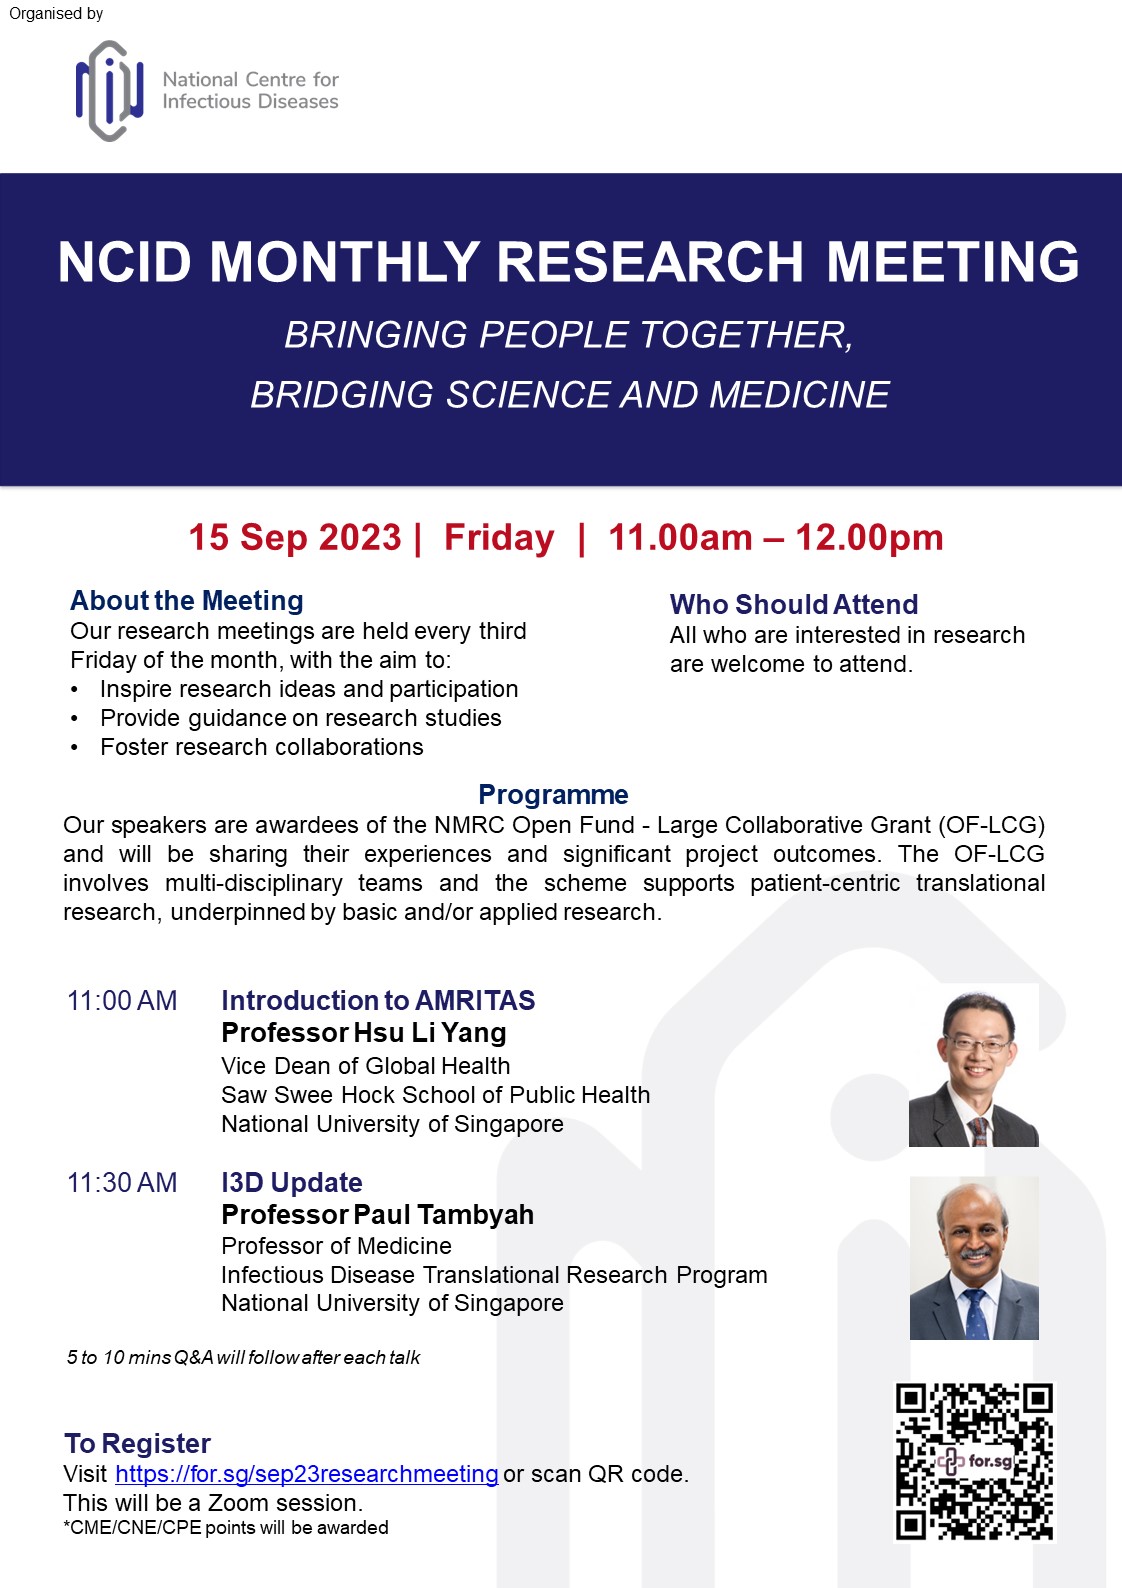 NCID Research Meeting Publicity Poster_Sep2023.jpg